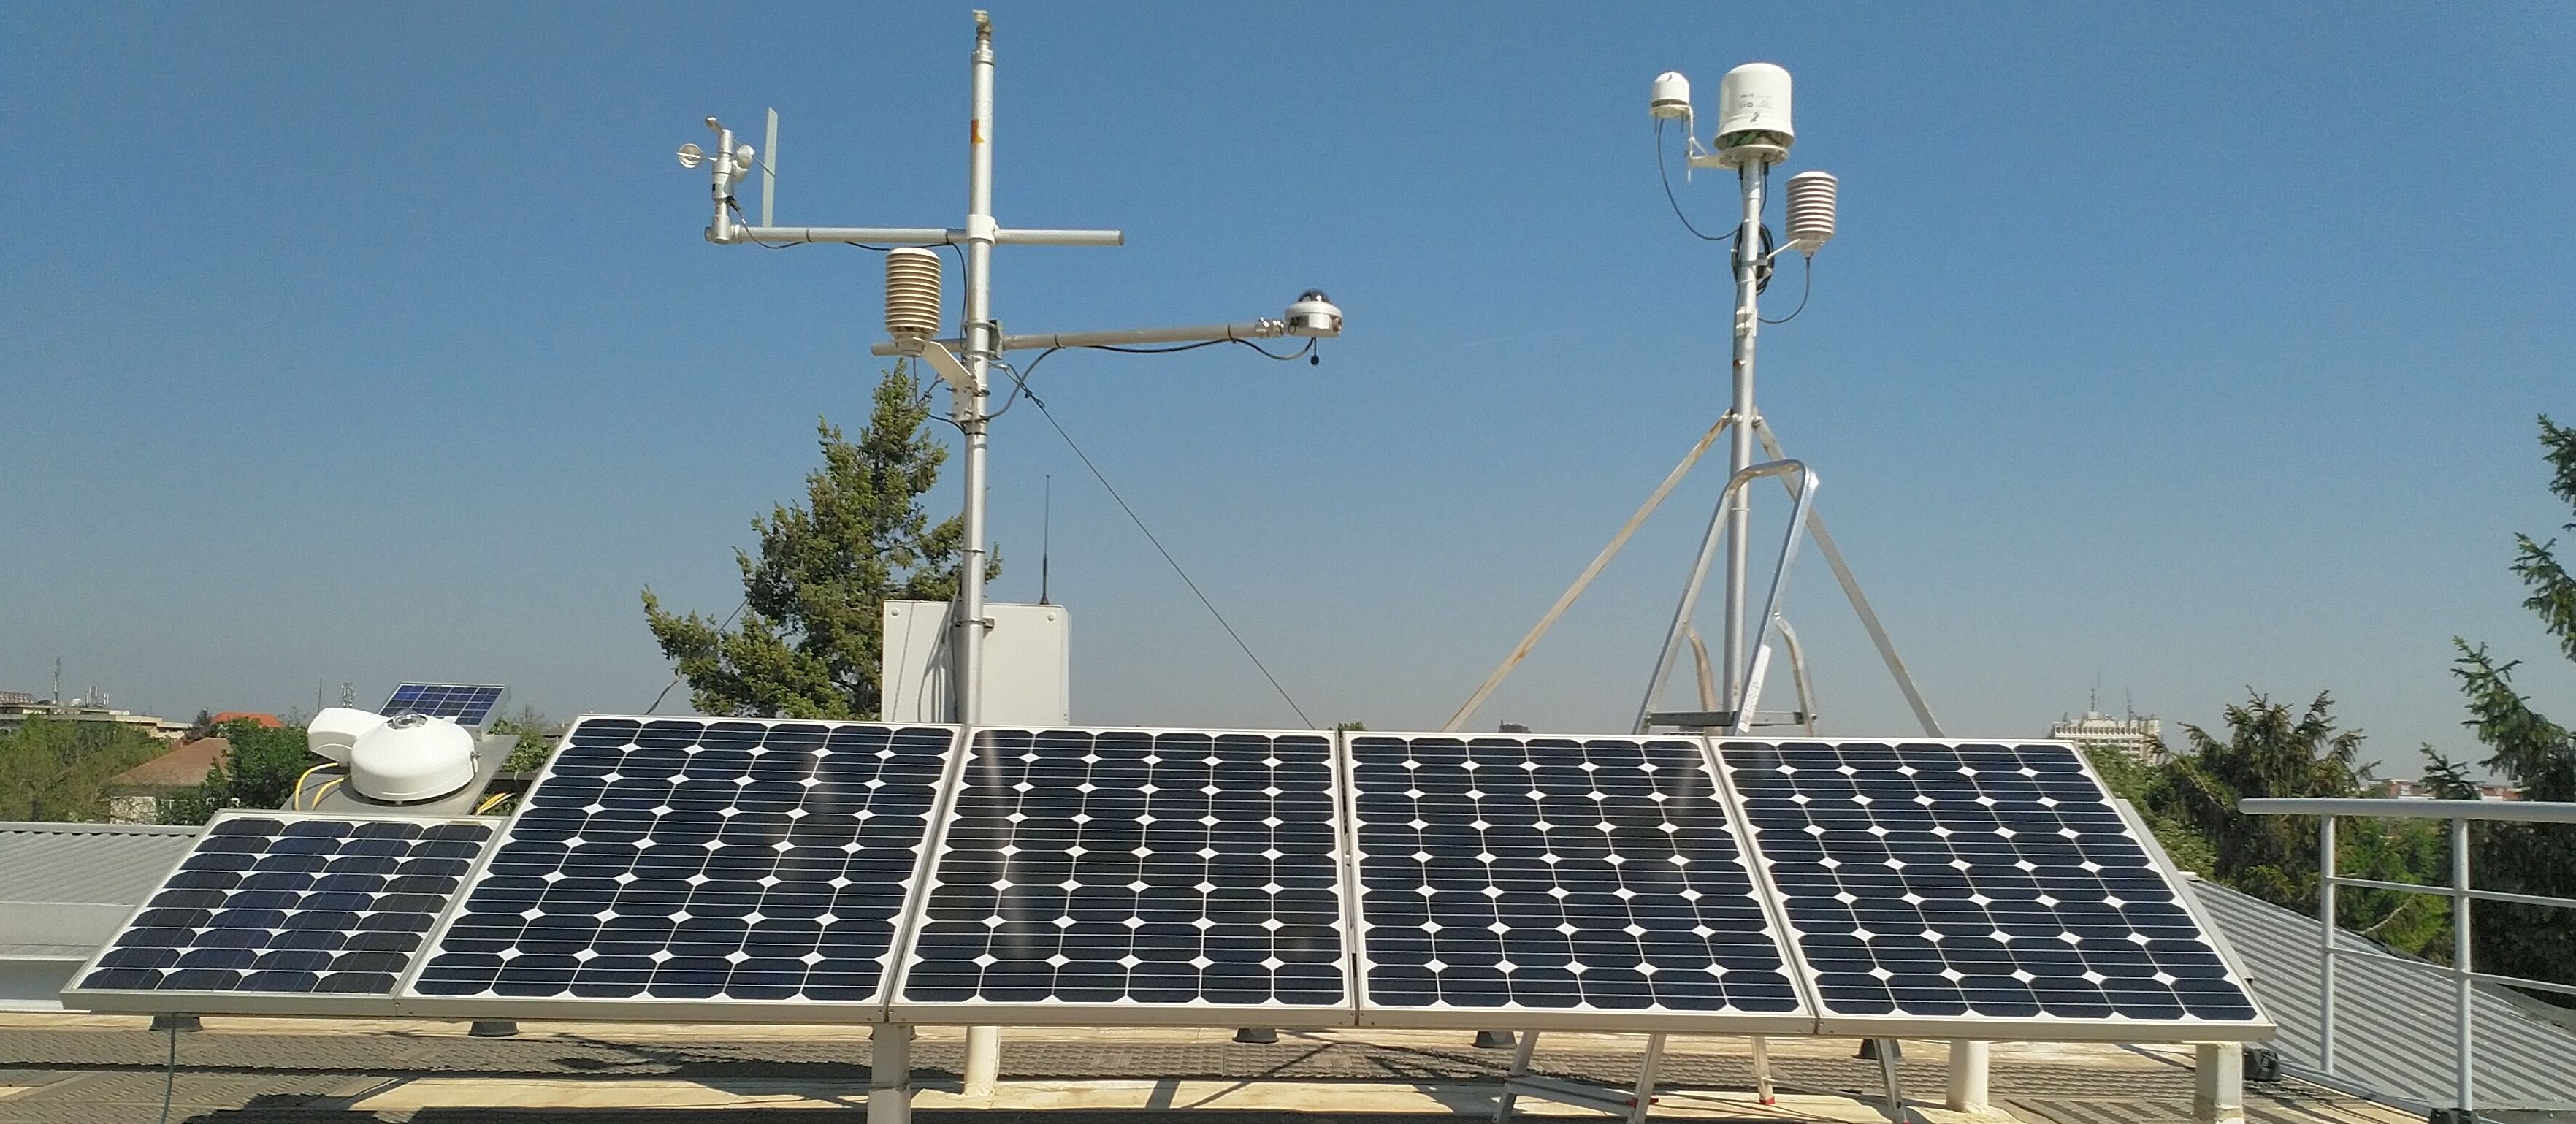 A micro PV plant of 540Wp connected to a purely resistive load, fully monitored